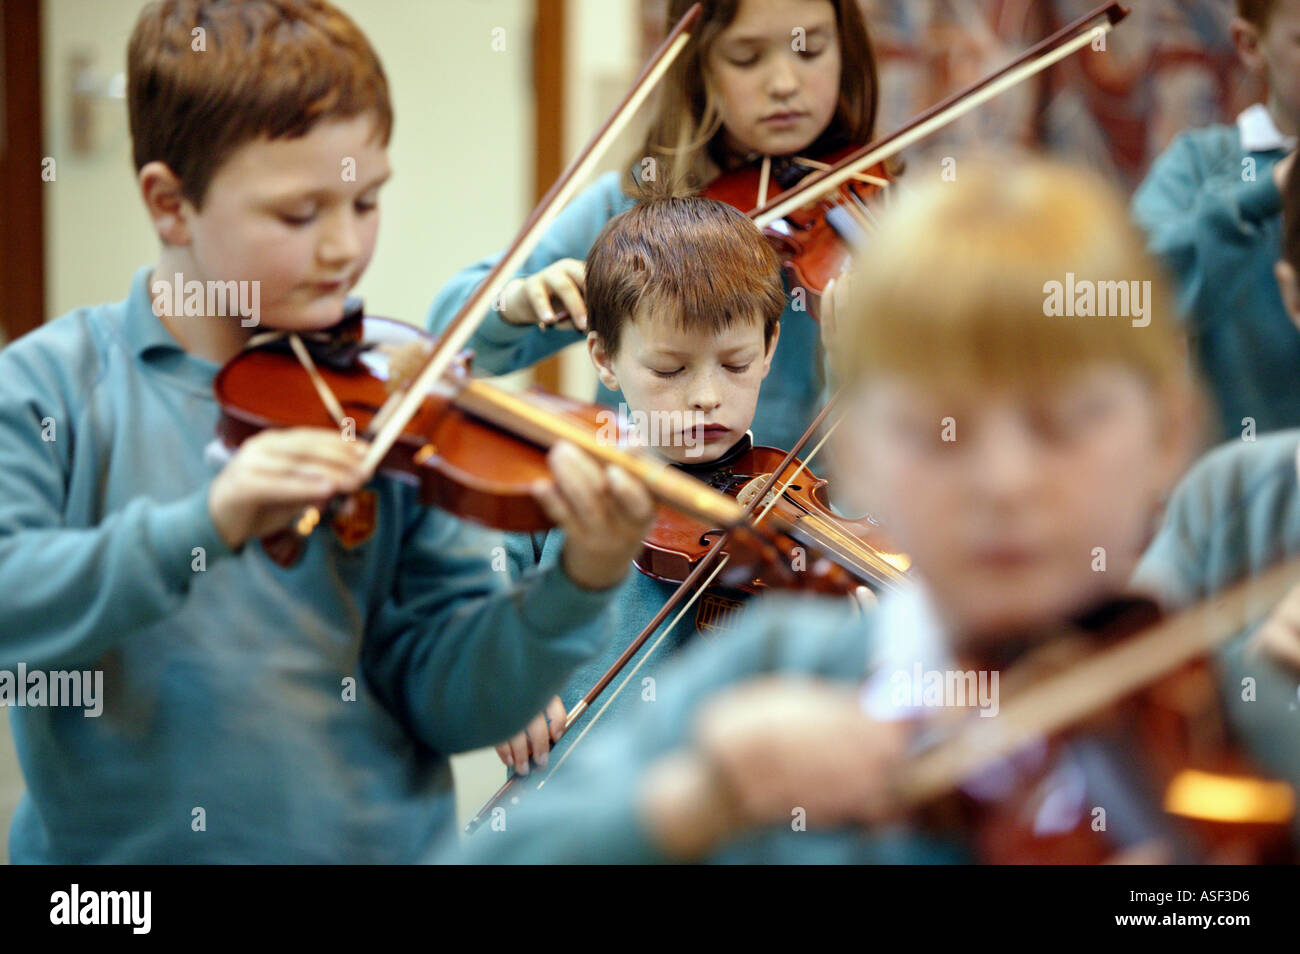 Violin lessons for Year 4 pupils at St Lawrence primary school in Ludlow, Shropshire, UK Stock Photo